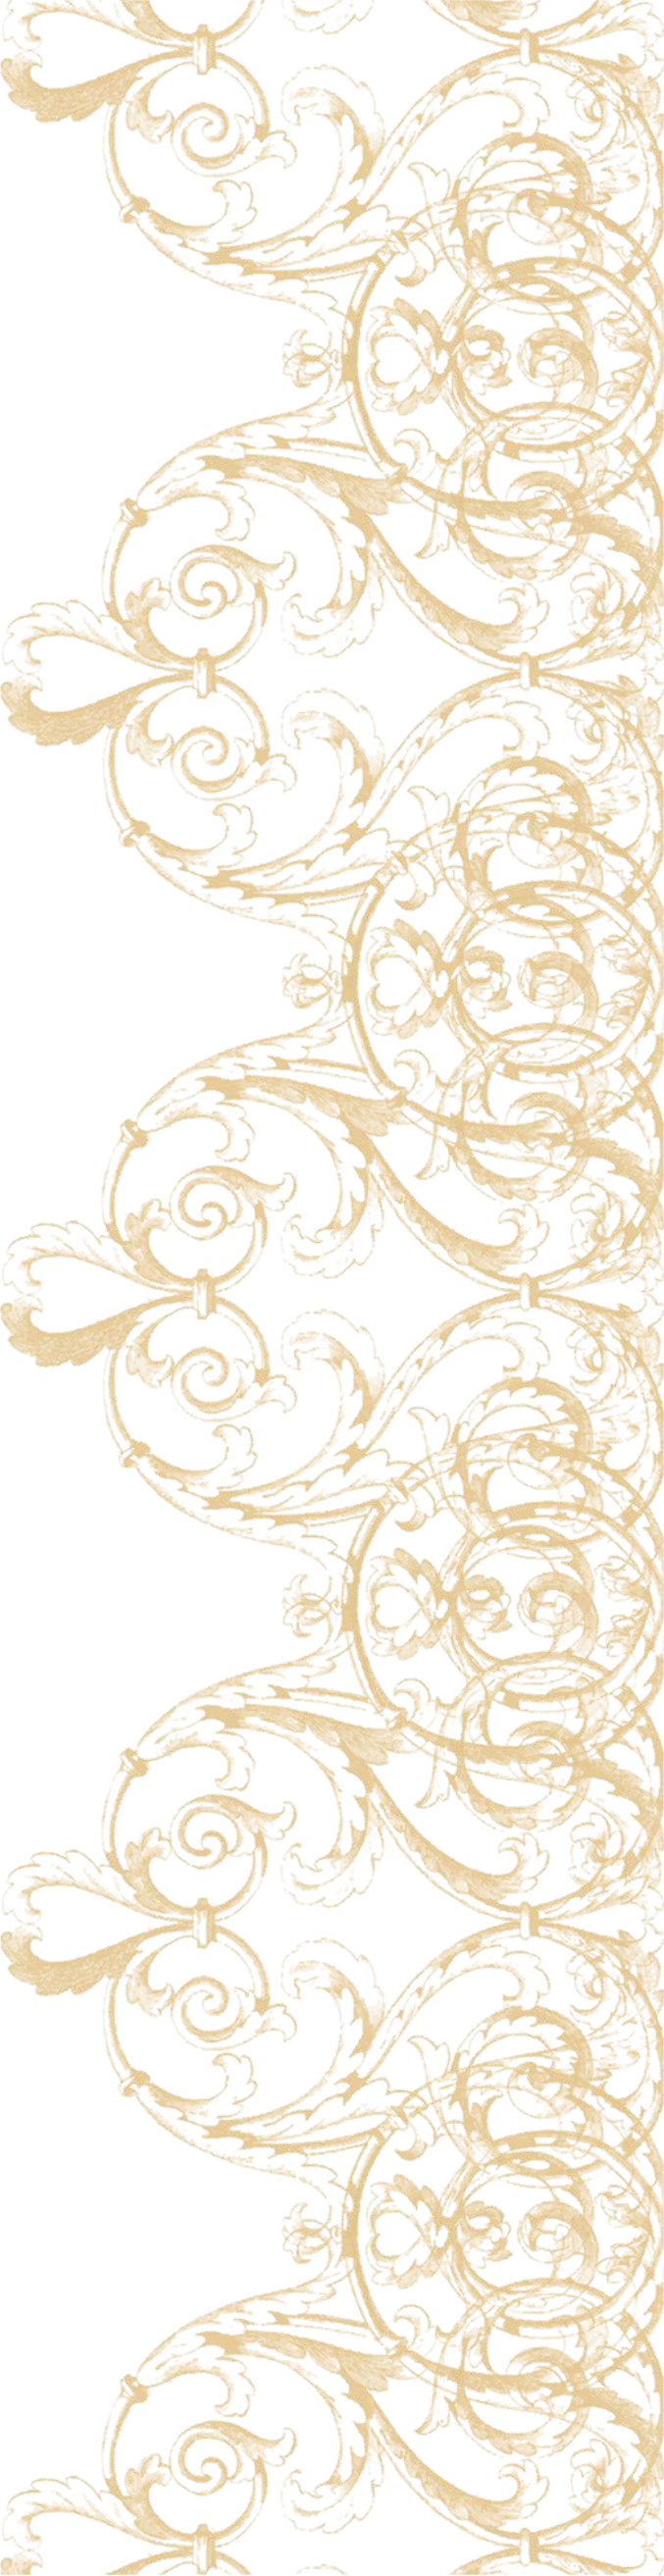 Download High Quality Lace Border Png Transparent Background Free Download 37001 Freeiconspng